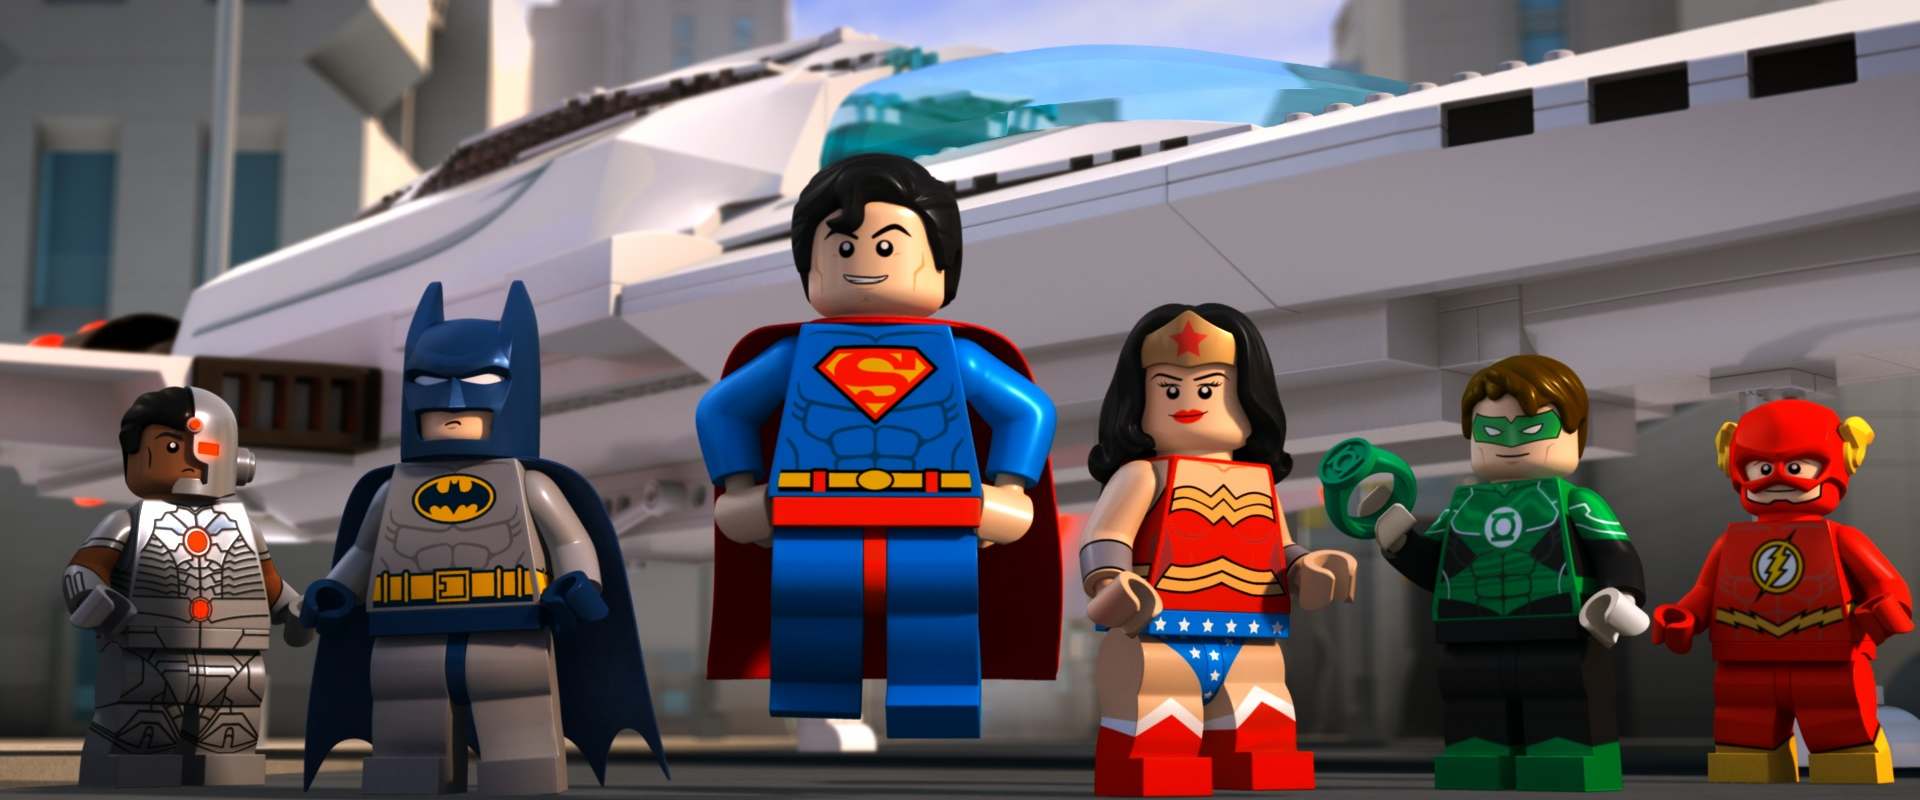 LEGO DC Super Heroes: Justice League - Attack of the Legion of Doom! background 2